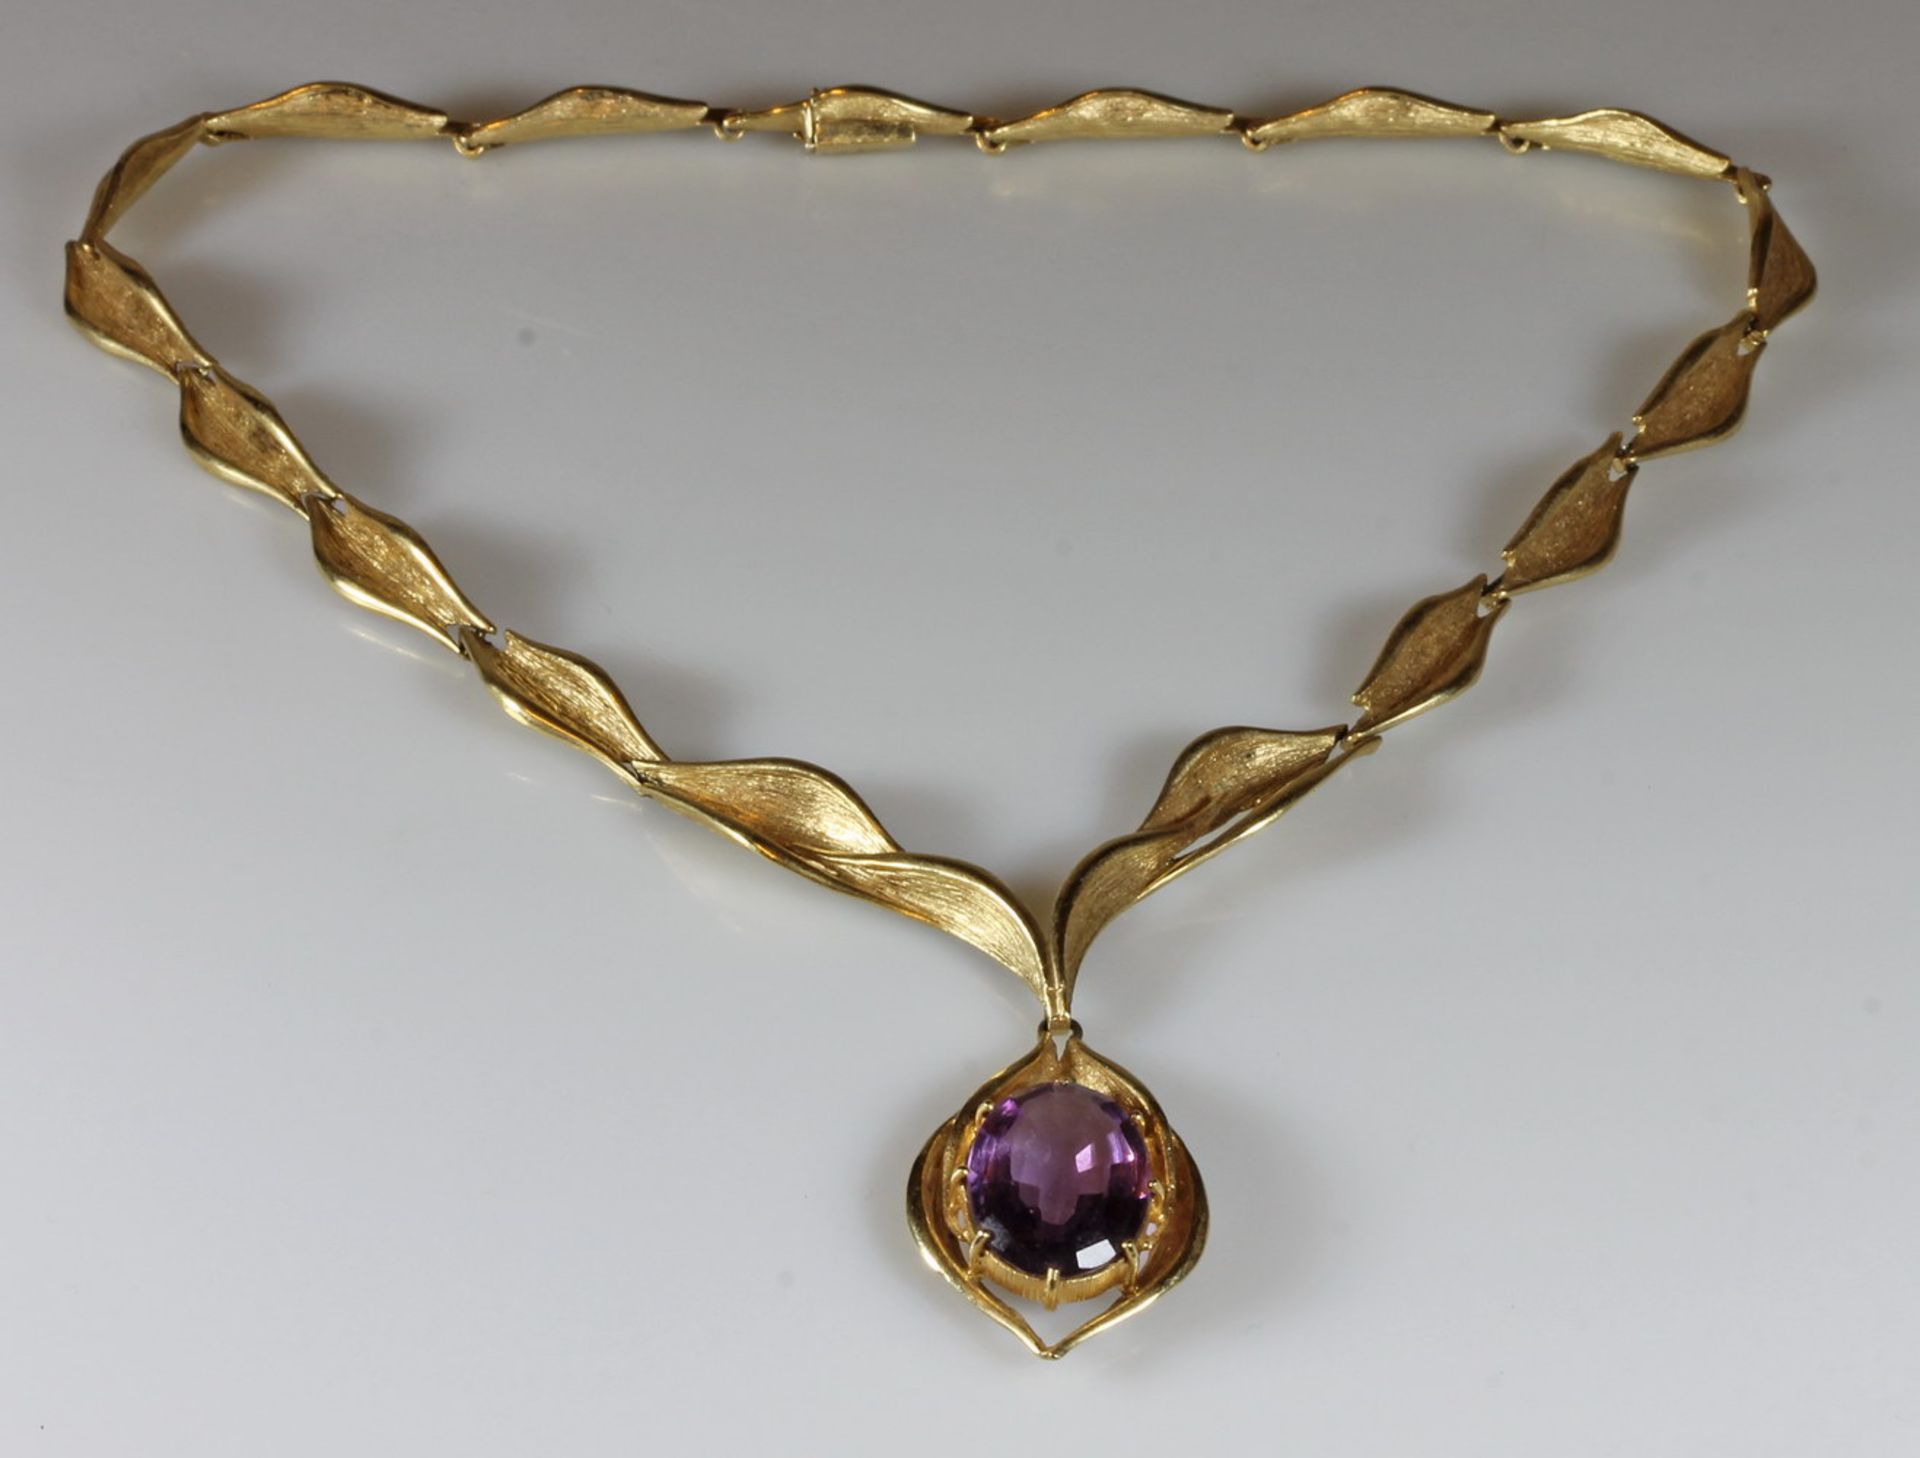 Collier, GG 585, 1 oval facettierter Amethyst, 43 g - Image 2 of 2